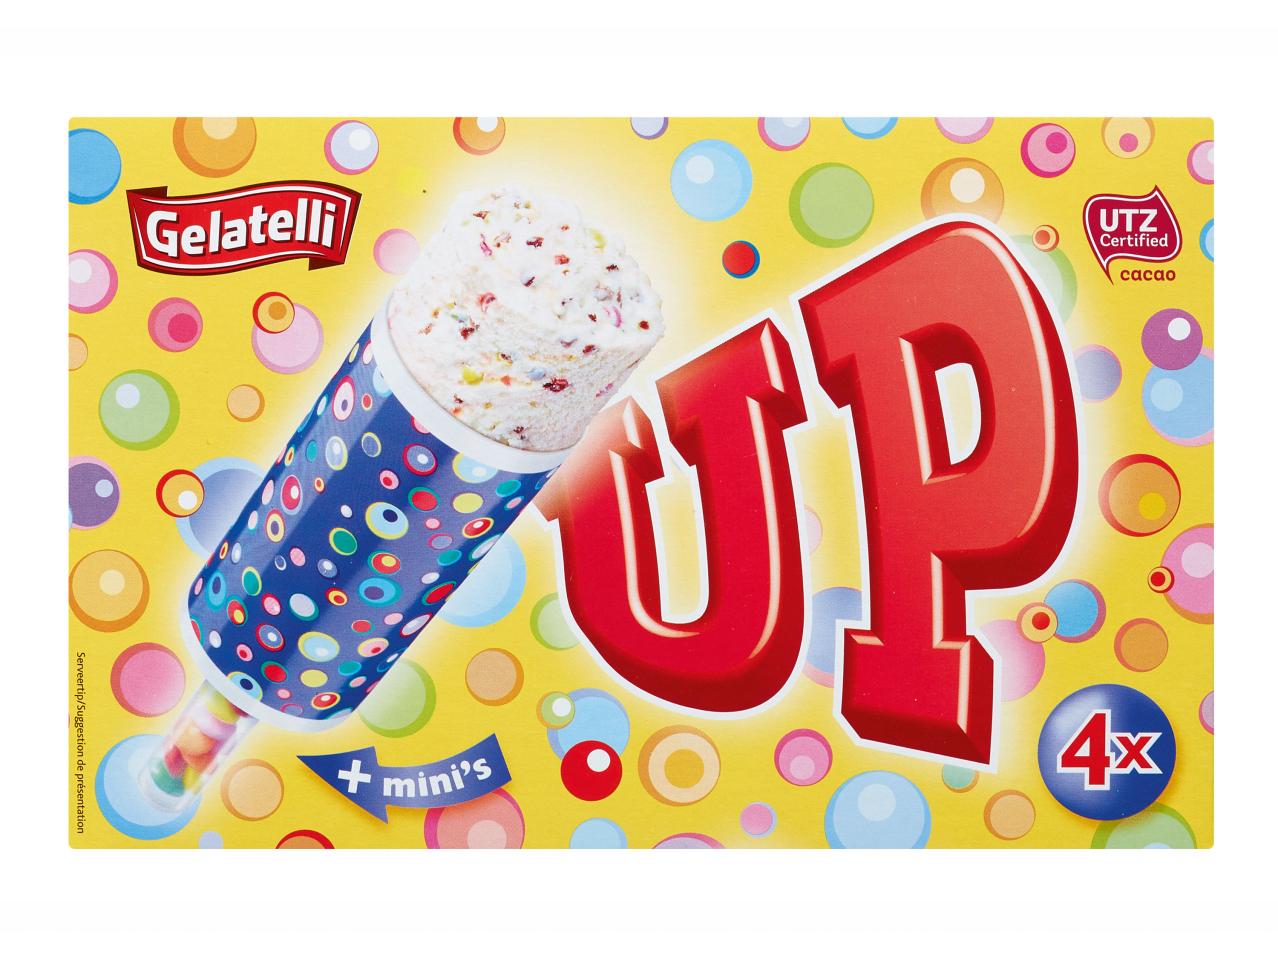 Glace vanille push-up